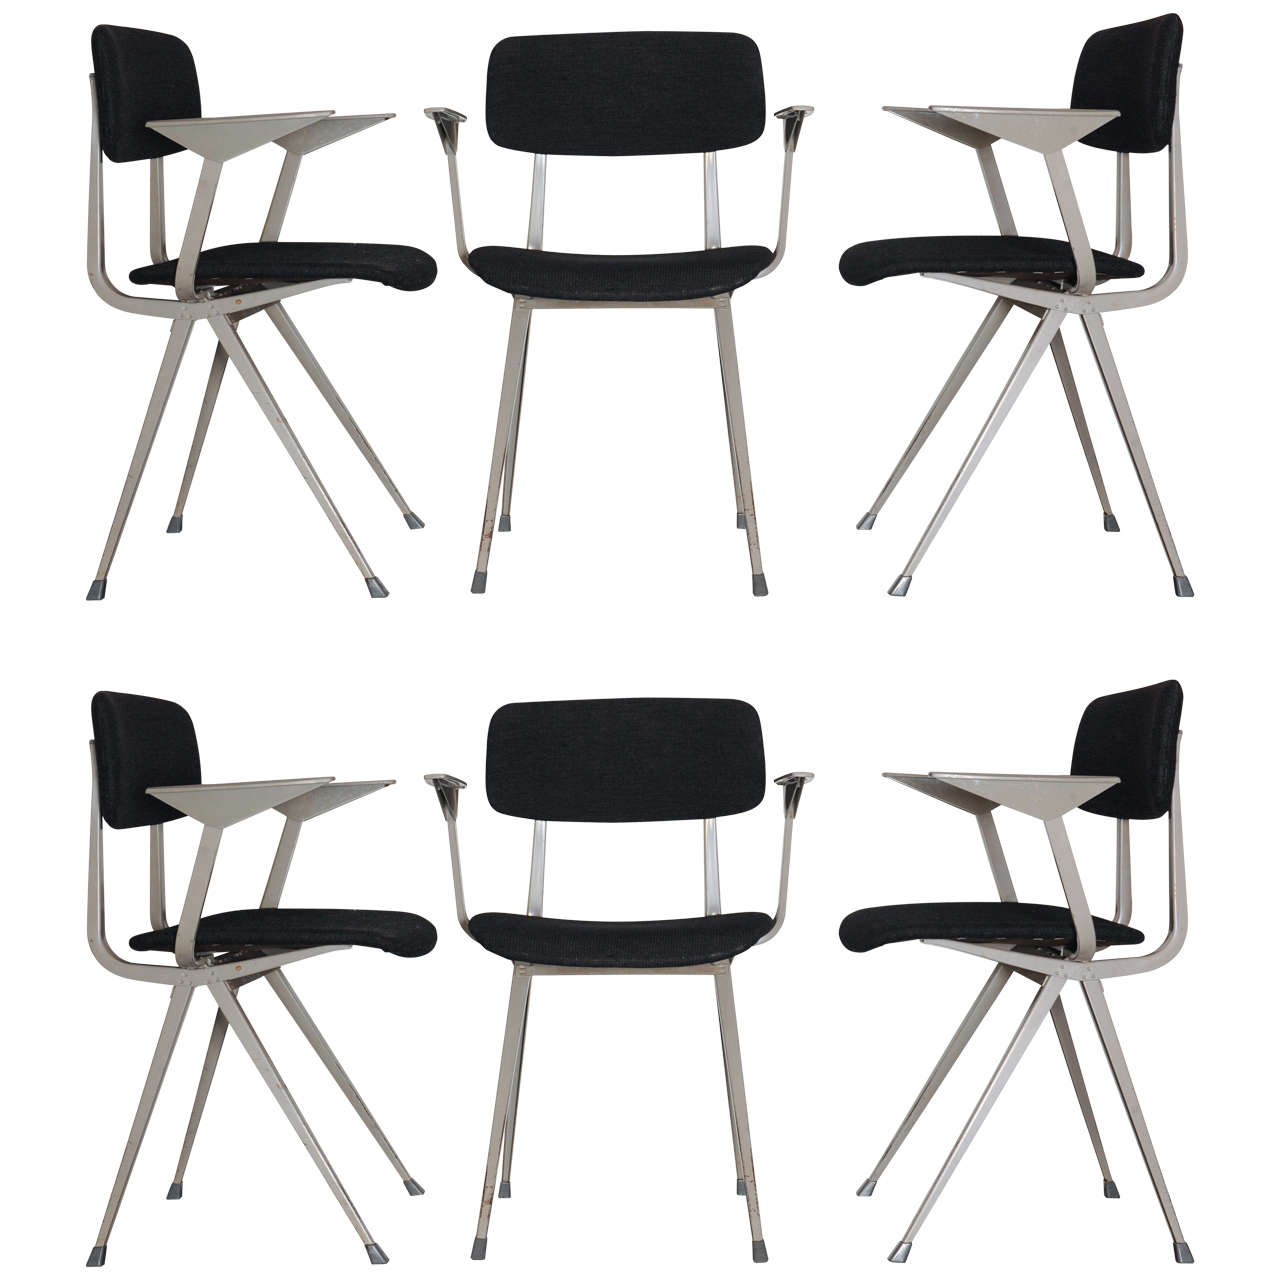 Set of 6 industrial chairs "Result" by Friso Kramer for Ahrend For Sale